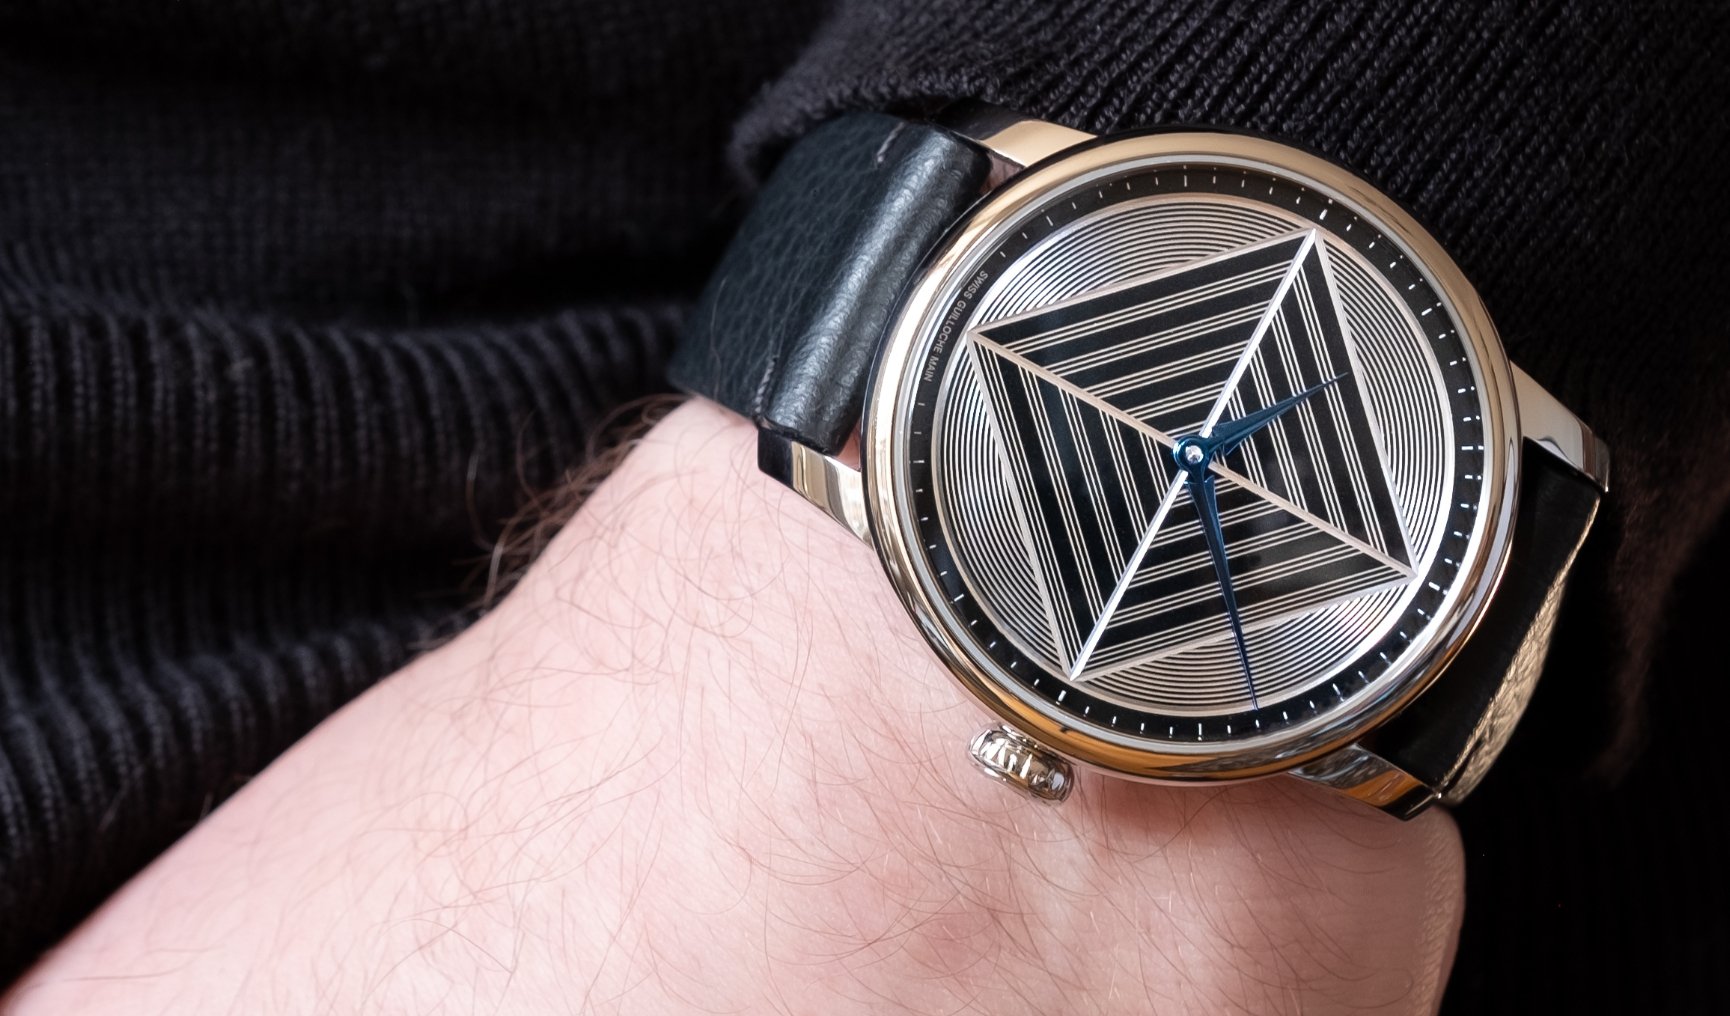 Introducing: Louis Erard Excellence Guilloché Main - Oracle Time